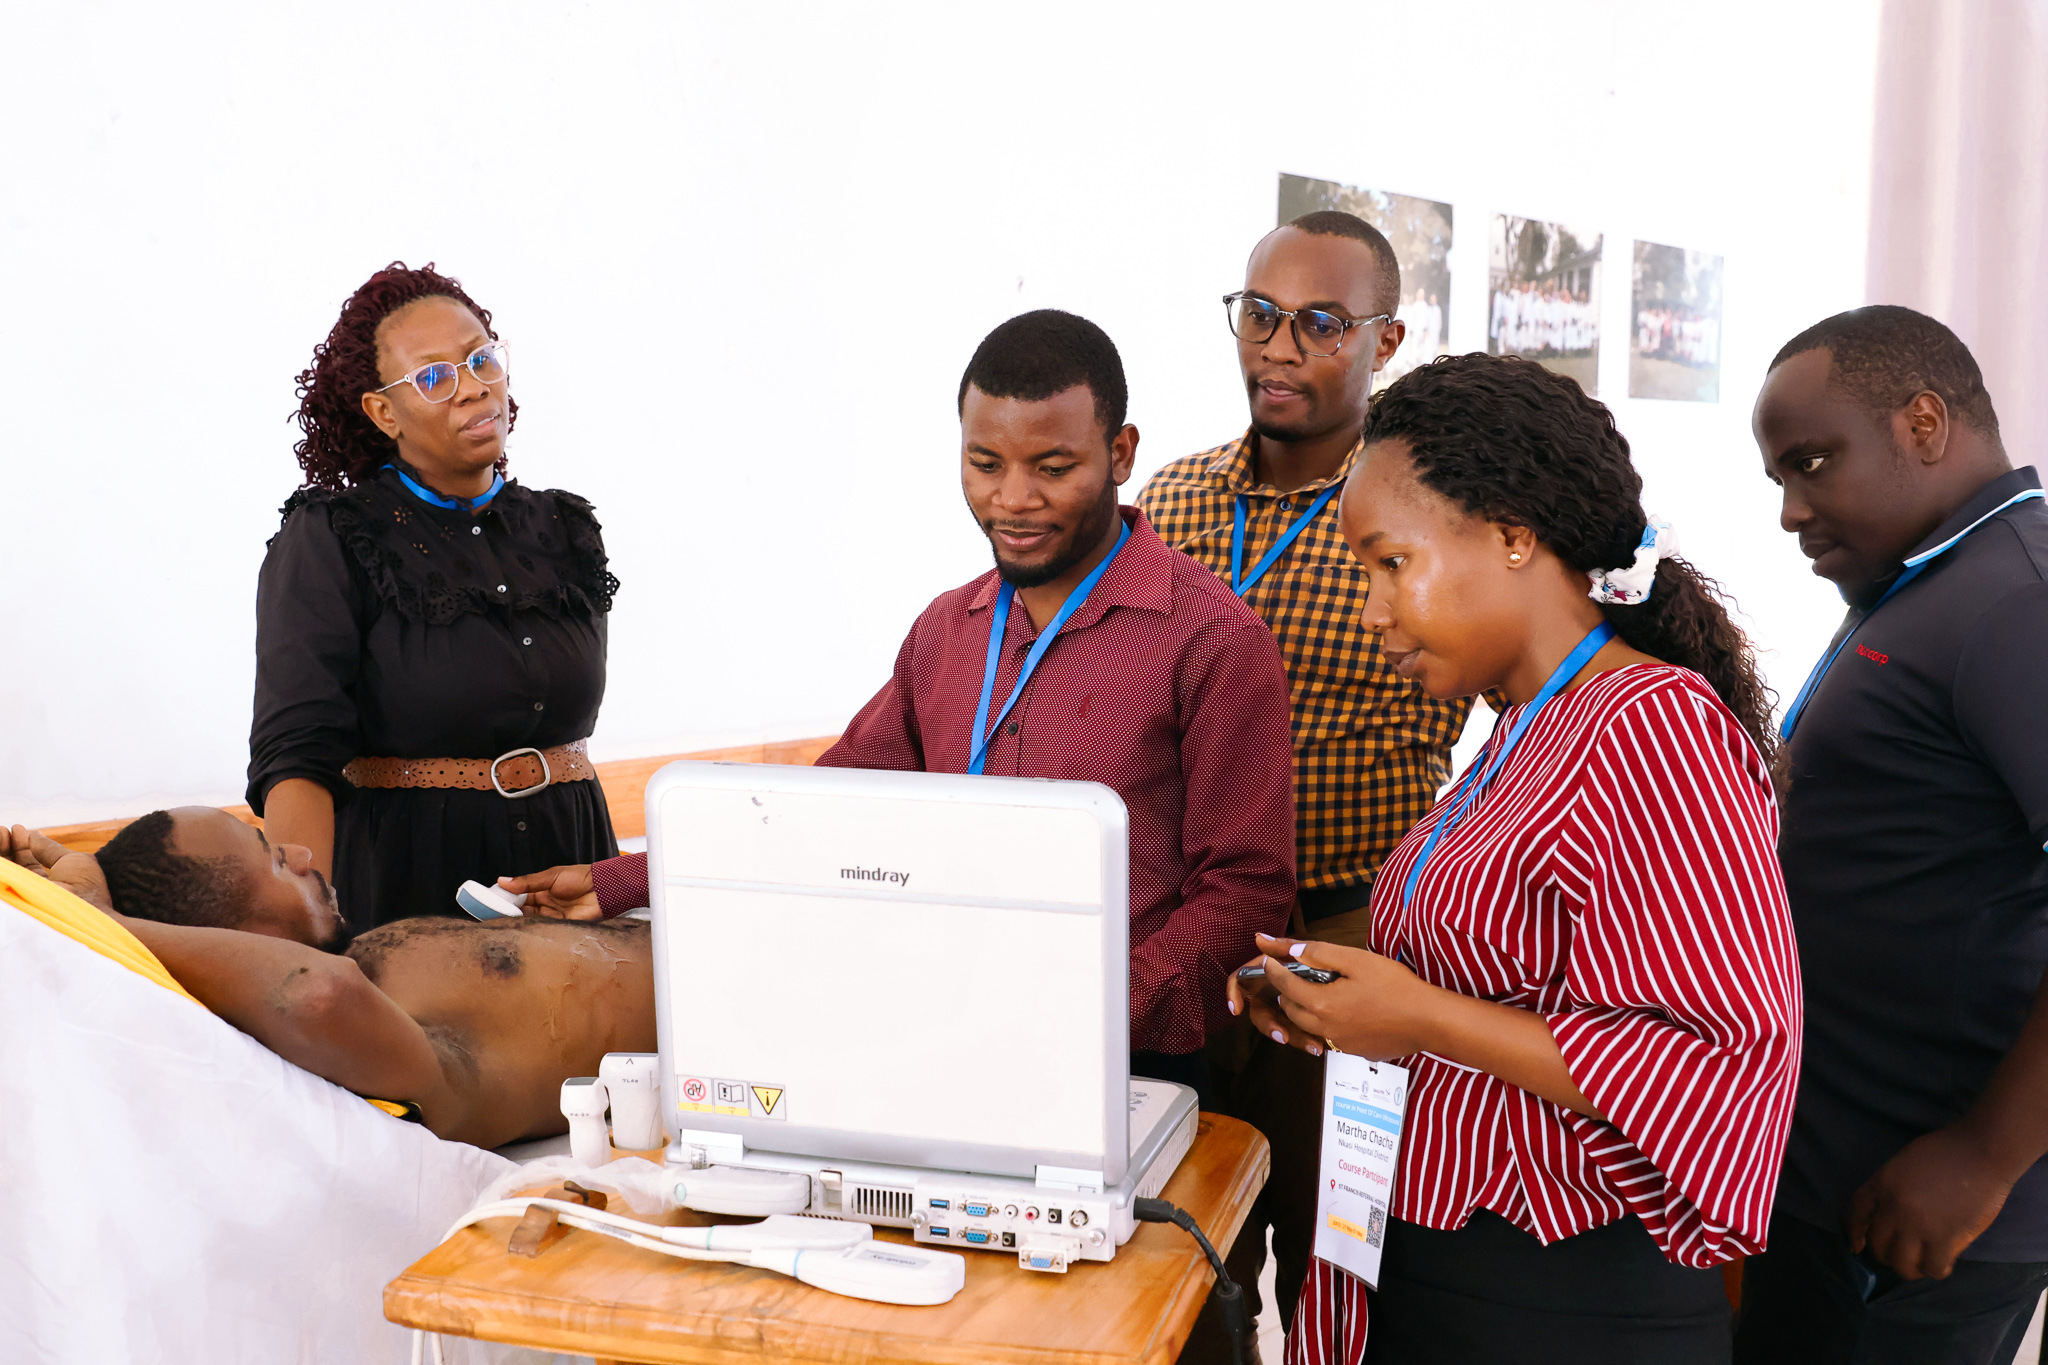 WORKSHOP: Ifakara, partners equip clinicians with diagnostic ultrasound skills